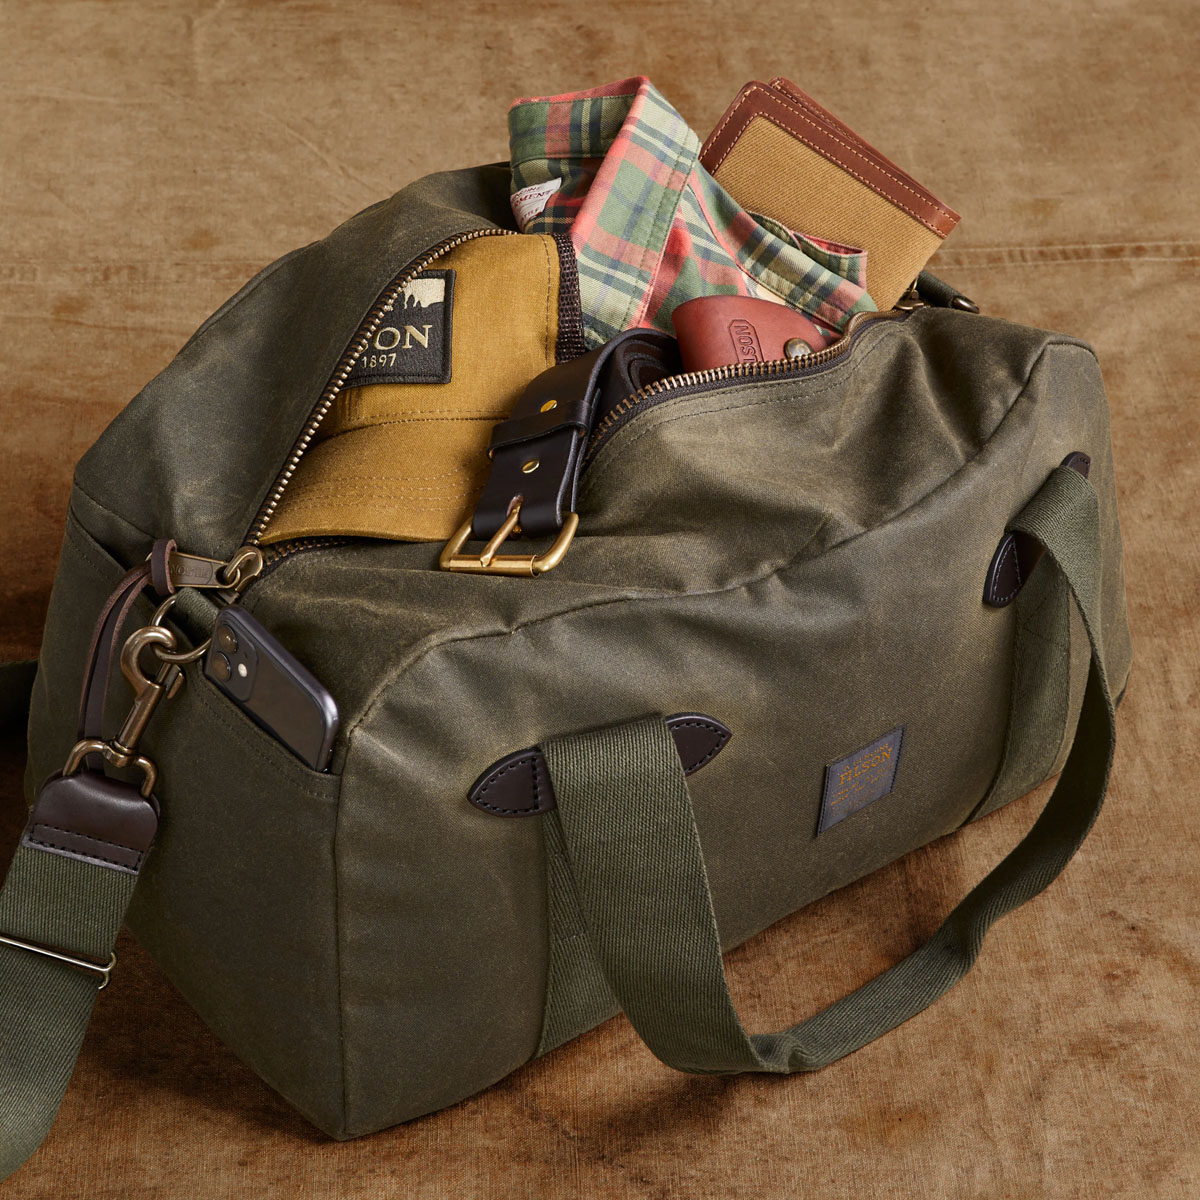 Filson Tin Cloth Small Duffle Bag Otter Green, a compact waxed-cotton duffle sized for overnight trips